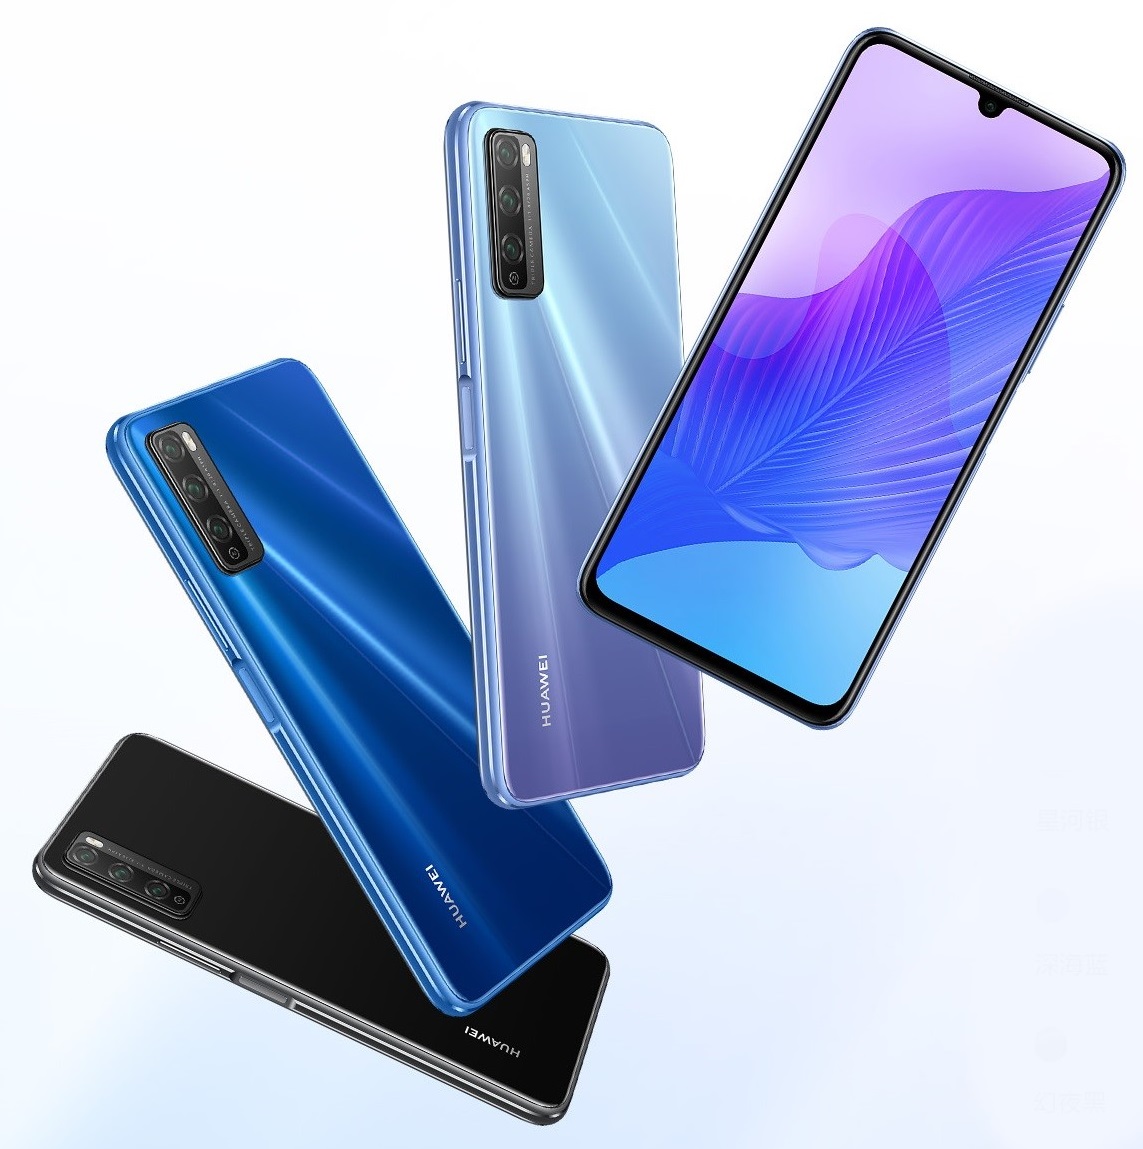 Overview of the Huawei Enjoy 20 Pro smartphone with key features